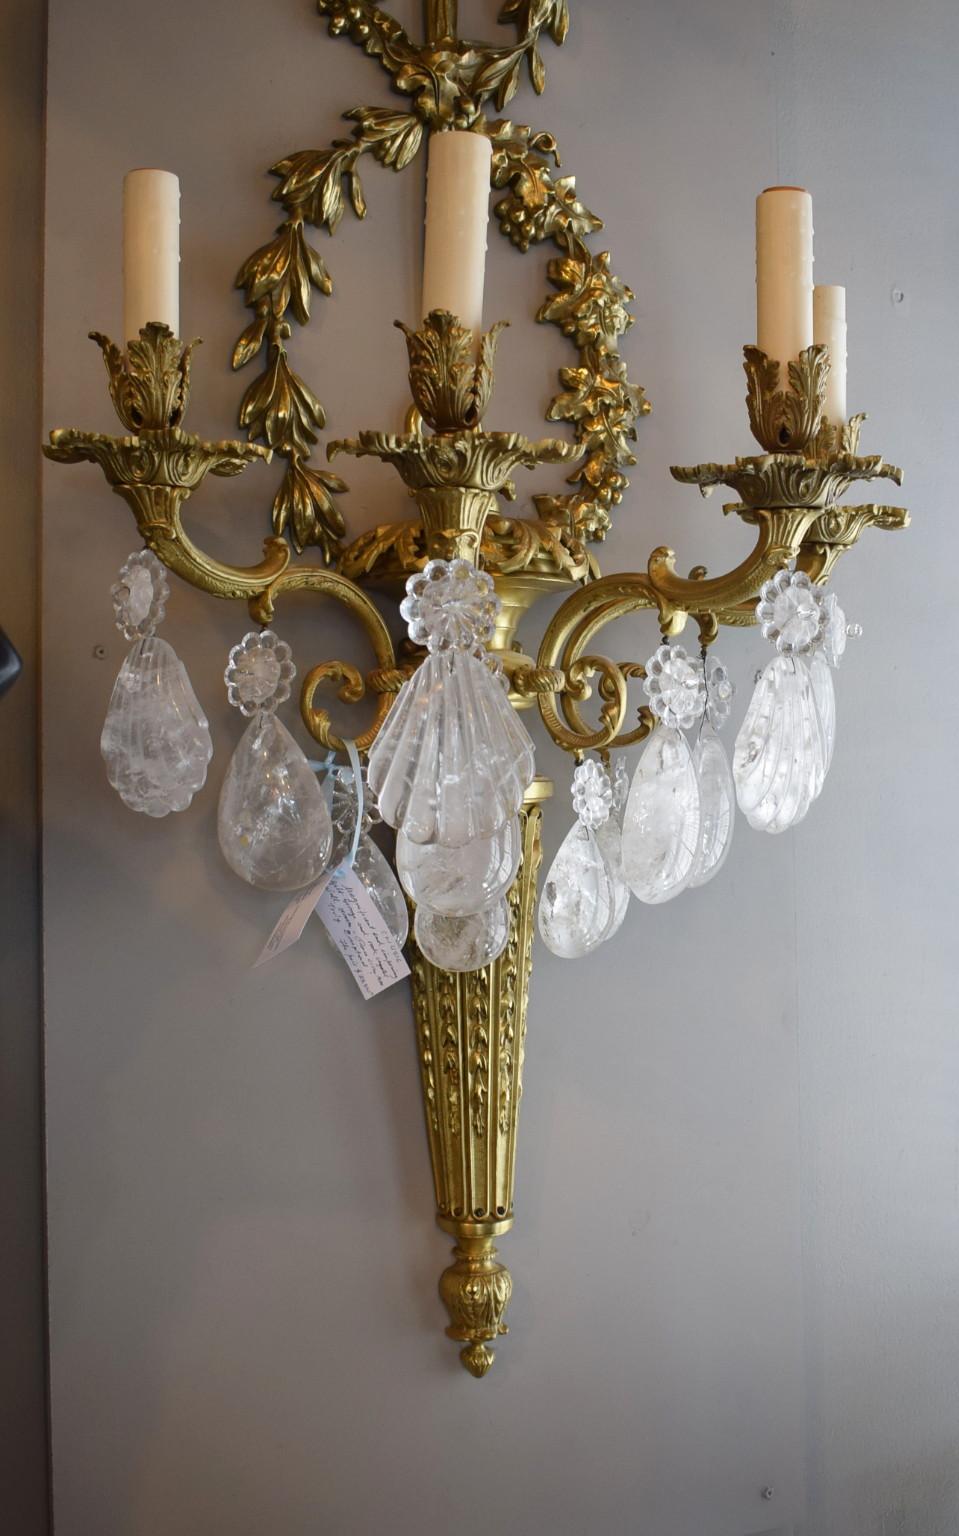 Magnificent and imposing pair of gilt bronze and rock crystal wall sconces, truly exceptional! Four lights each.
CW4516